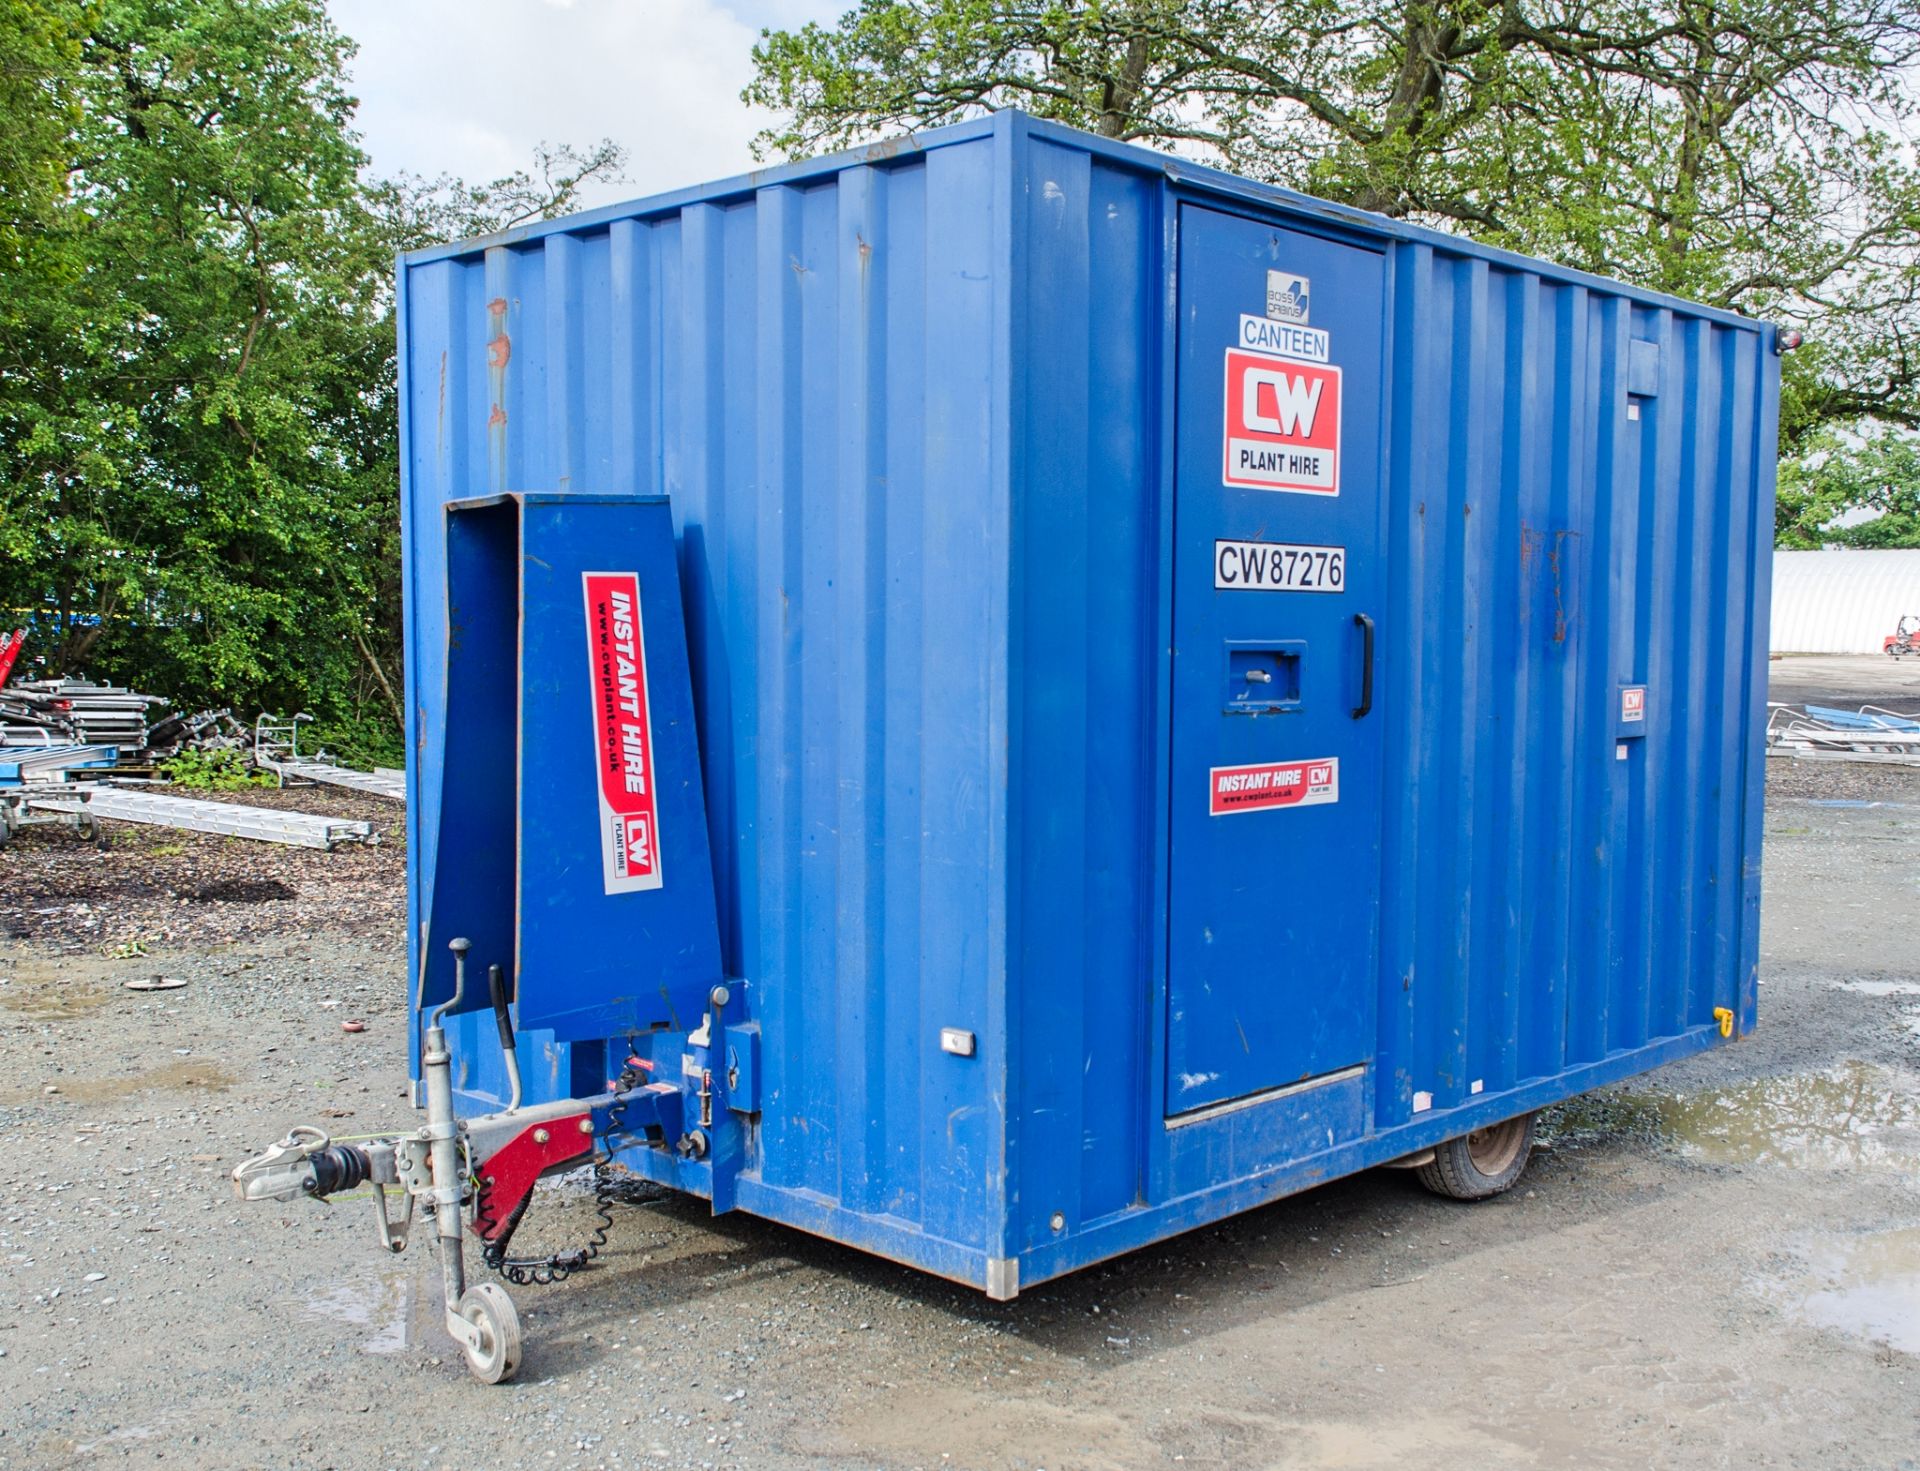 Boss Cabins 12 ft x 8 ft steel anti vandal mobile welfare site unit Comprising of: Canteen area,